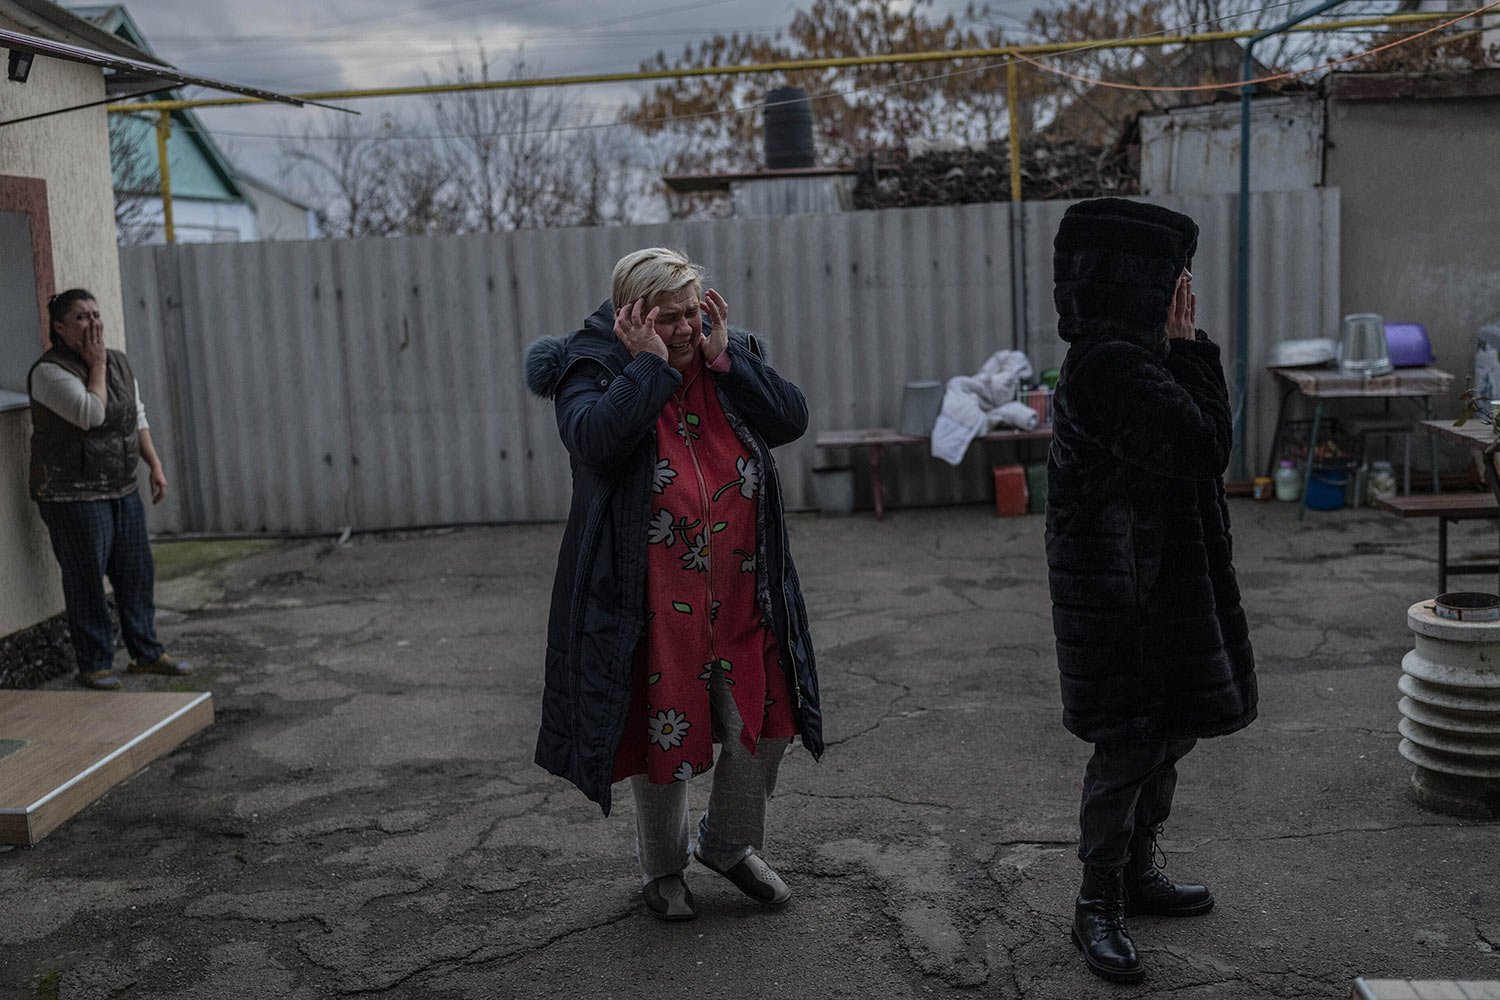  Natalia Voblikova, center, reacts after learning her son Artur was seriously injured during a Russian strike, in Kherson, southern Ukraine, Nov. 22, 2022. (AP Photo/Bernat Armangue) 